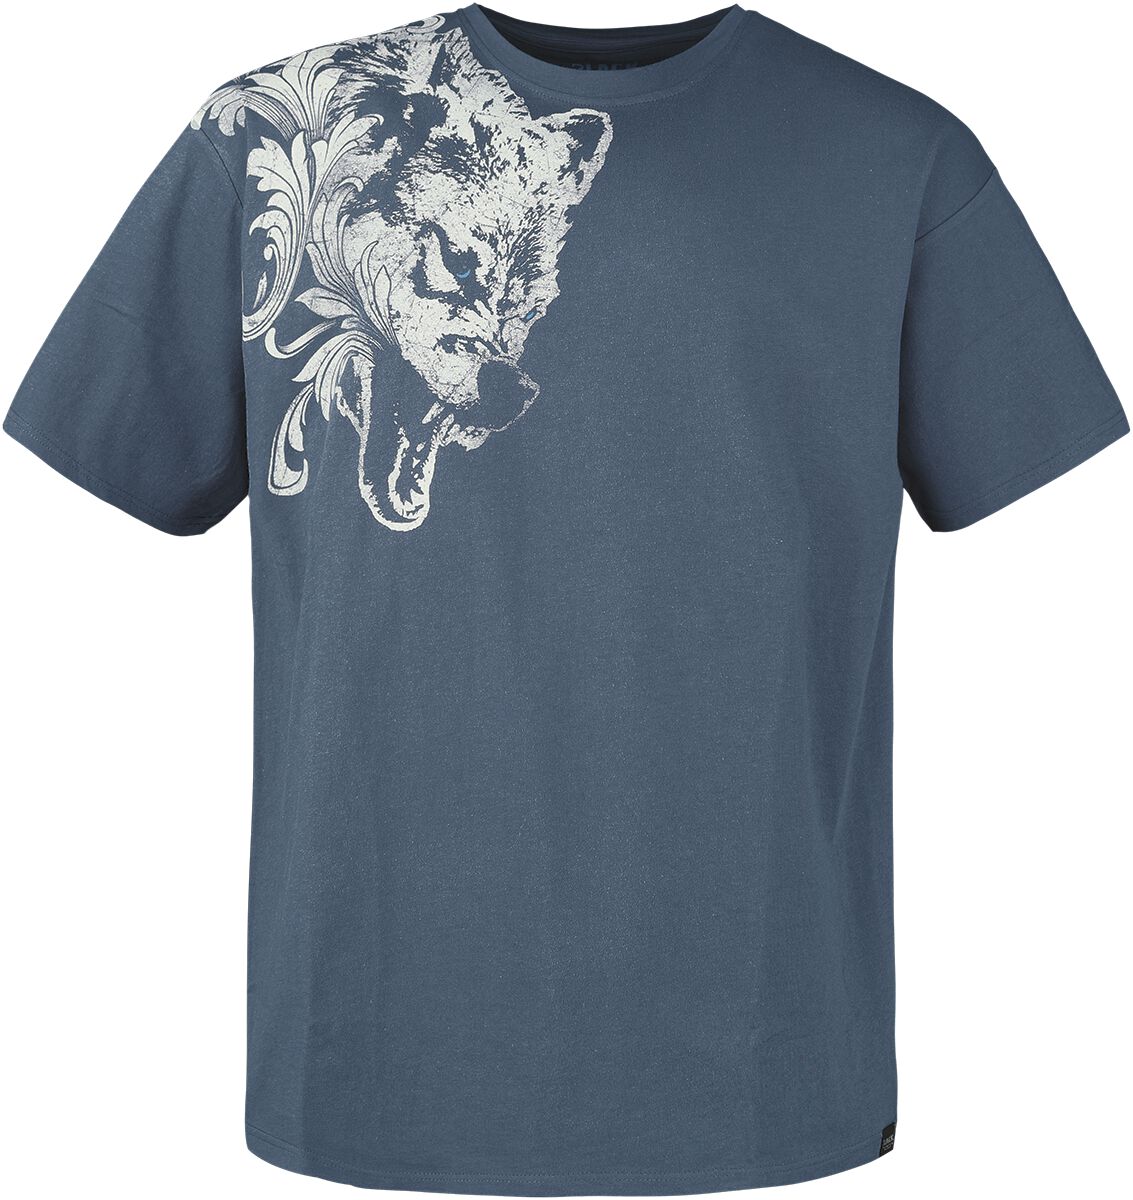 Image of T-Shirt di Black Premium by EMP - T-shirt with wolf print - S a M - Uomo - blu